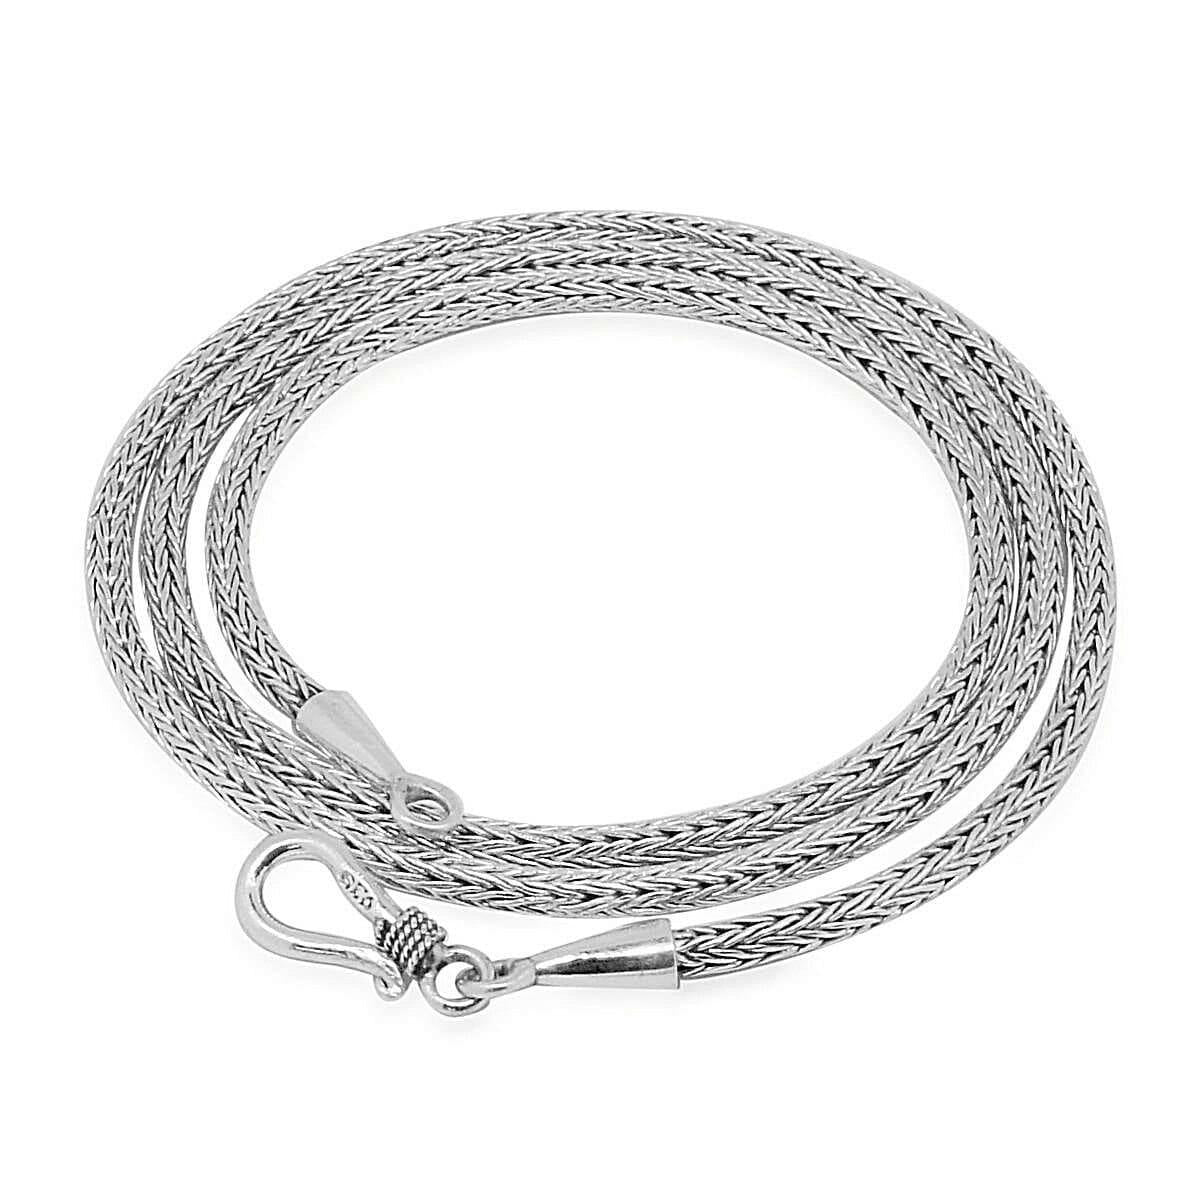 Handmade 2.5 mm Solid 925 Sterling Silver Bali Tulang Naga SNAKE ROUND Chain Necklace Oxidized 18, 20, 24 and 30 inches - Inspiring Jewellery